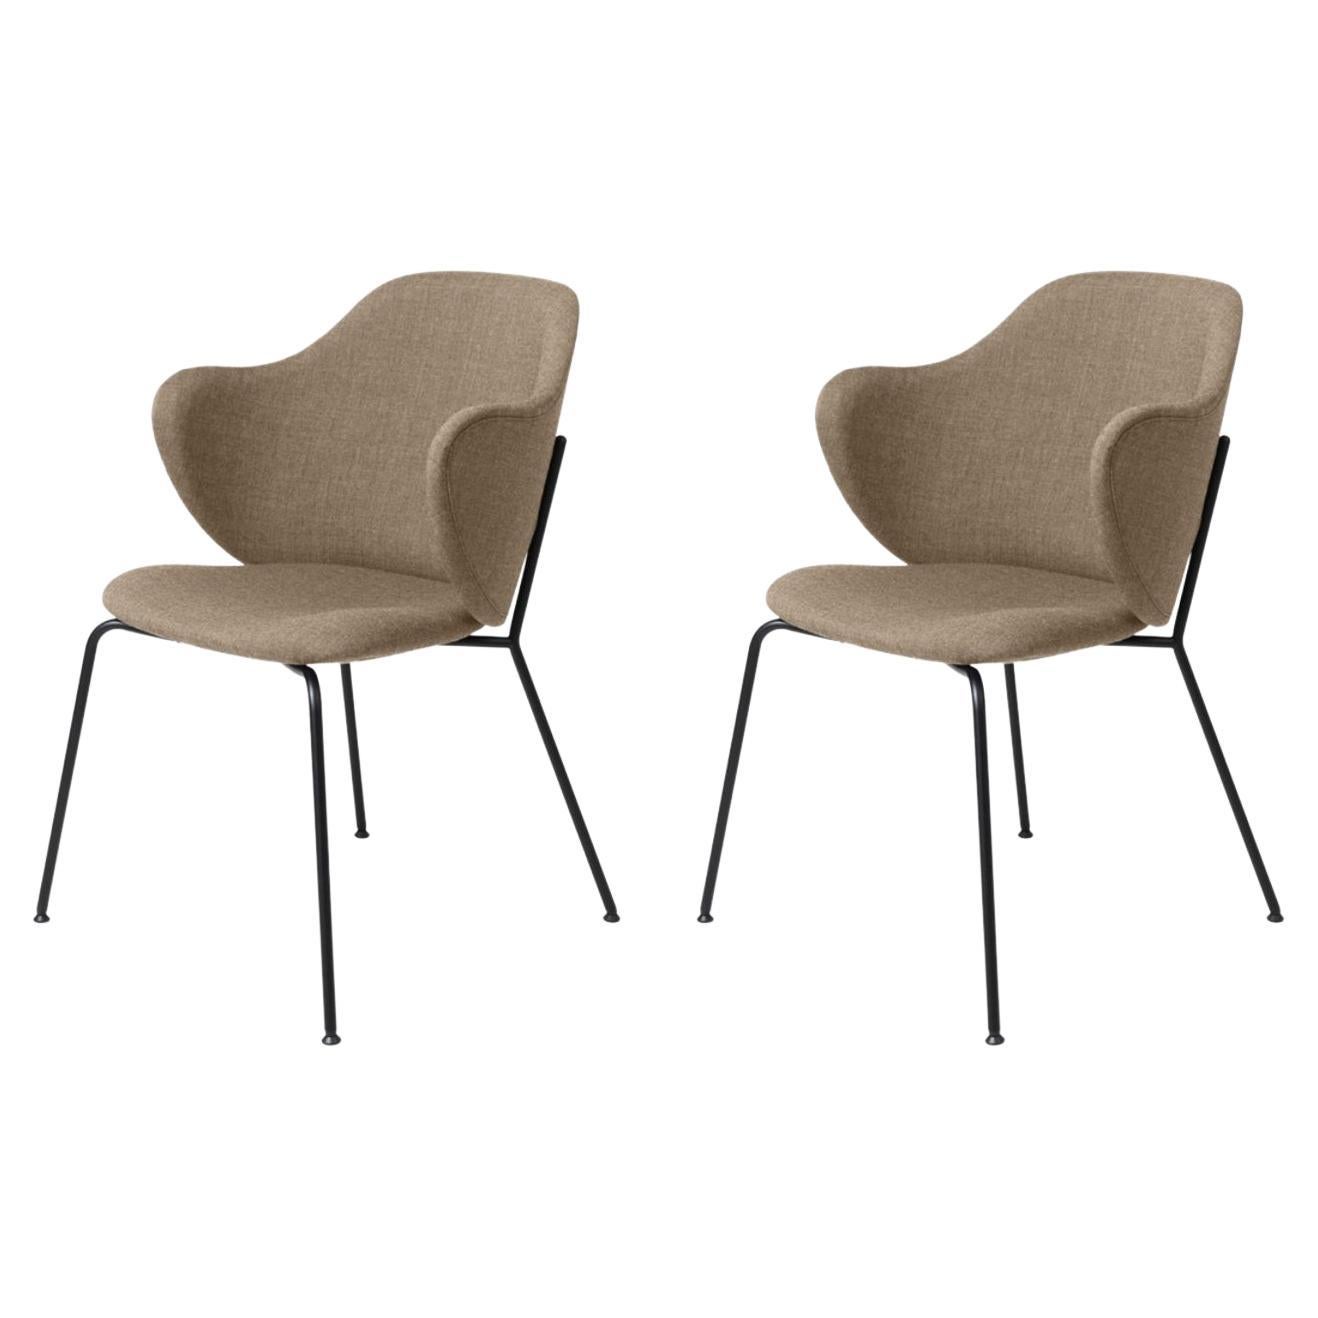 Set of 2 Sand Remix Lassen Chairs by Lassen For Sale